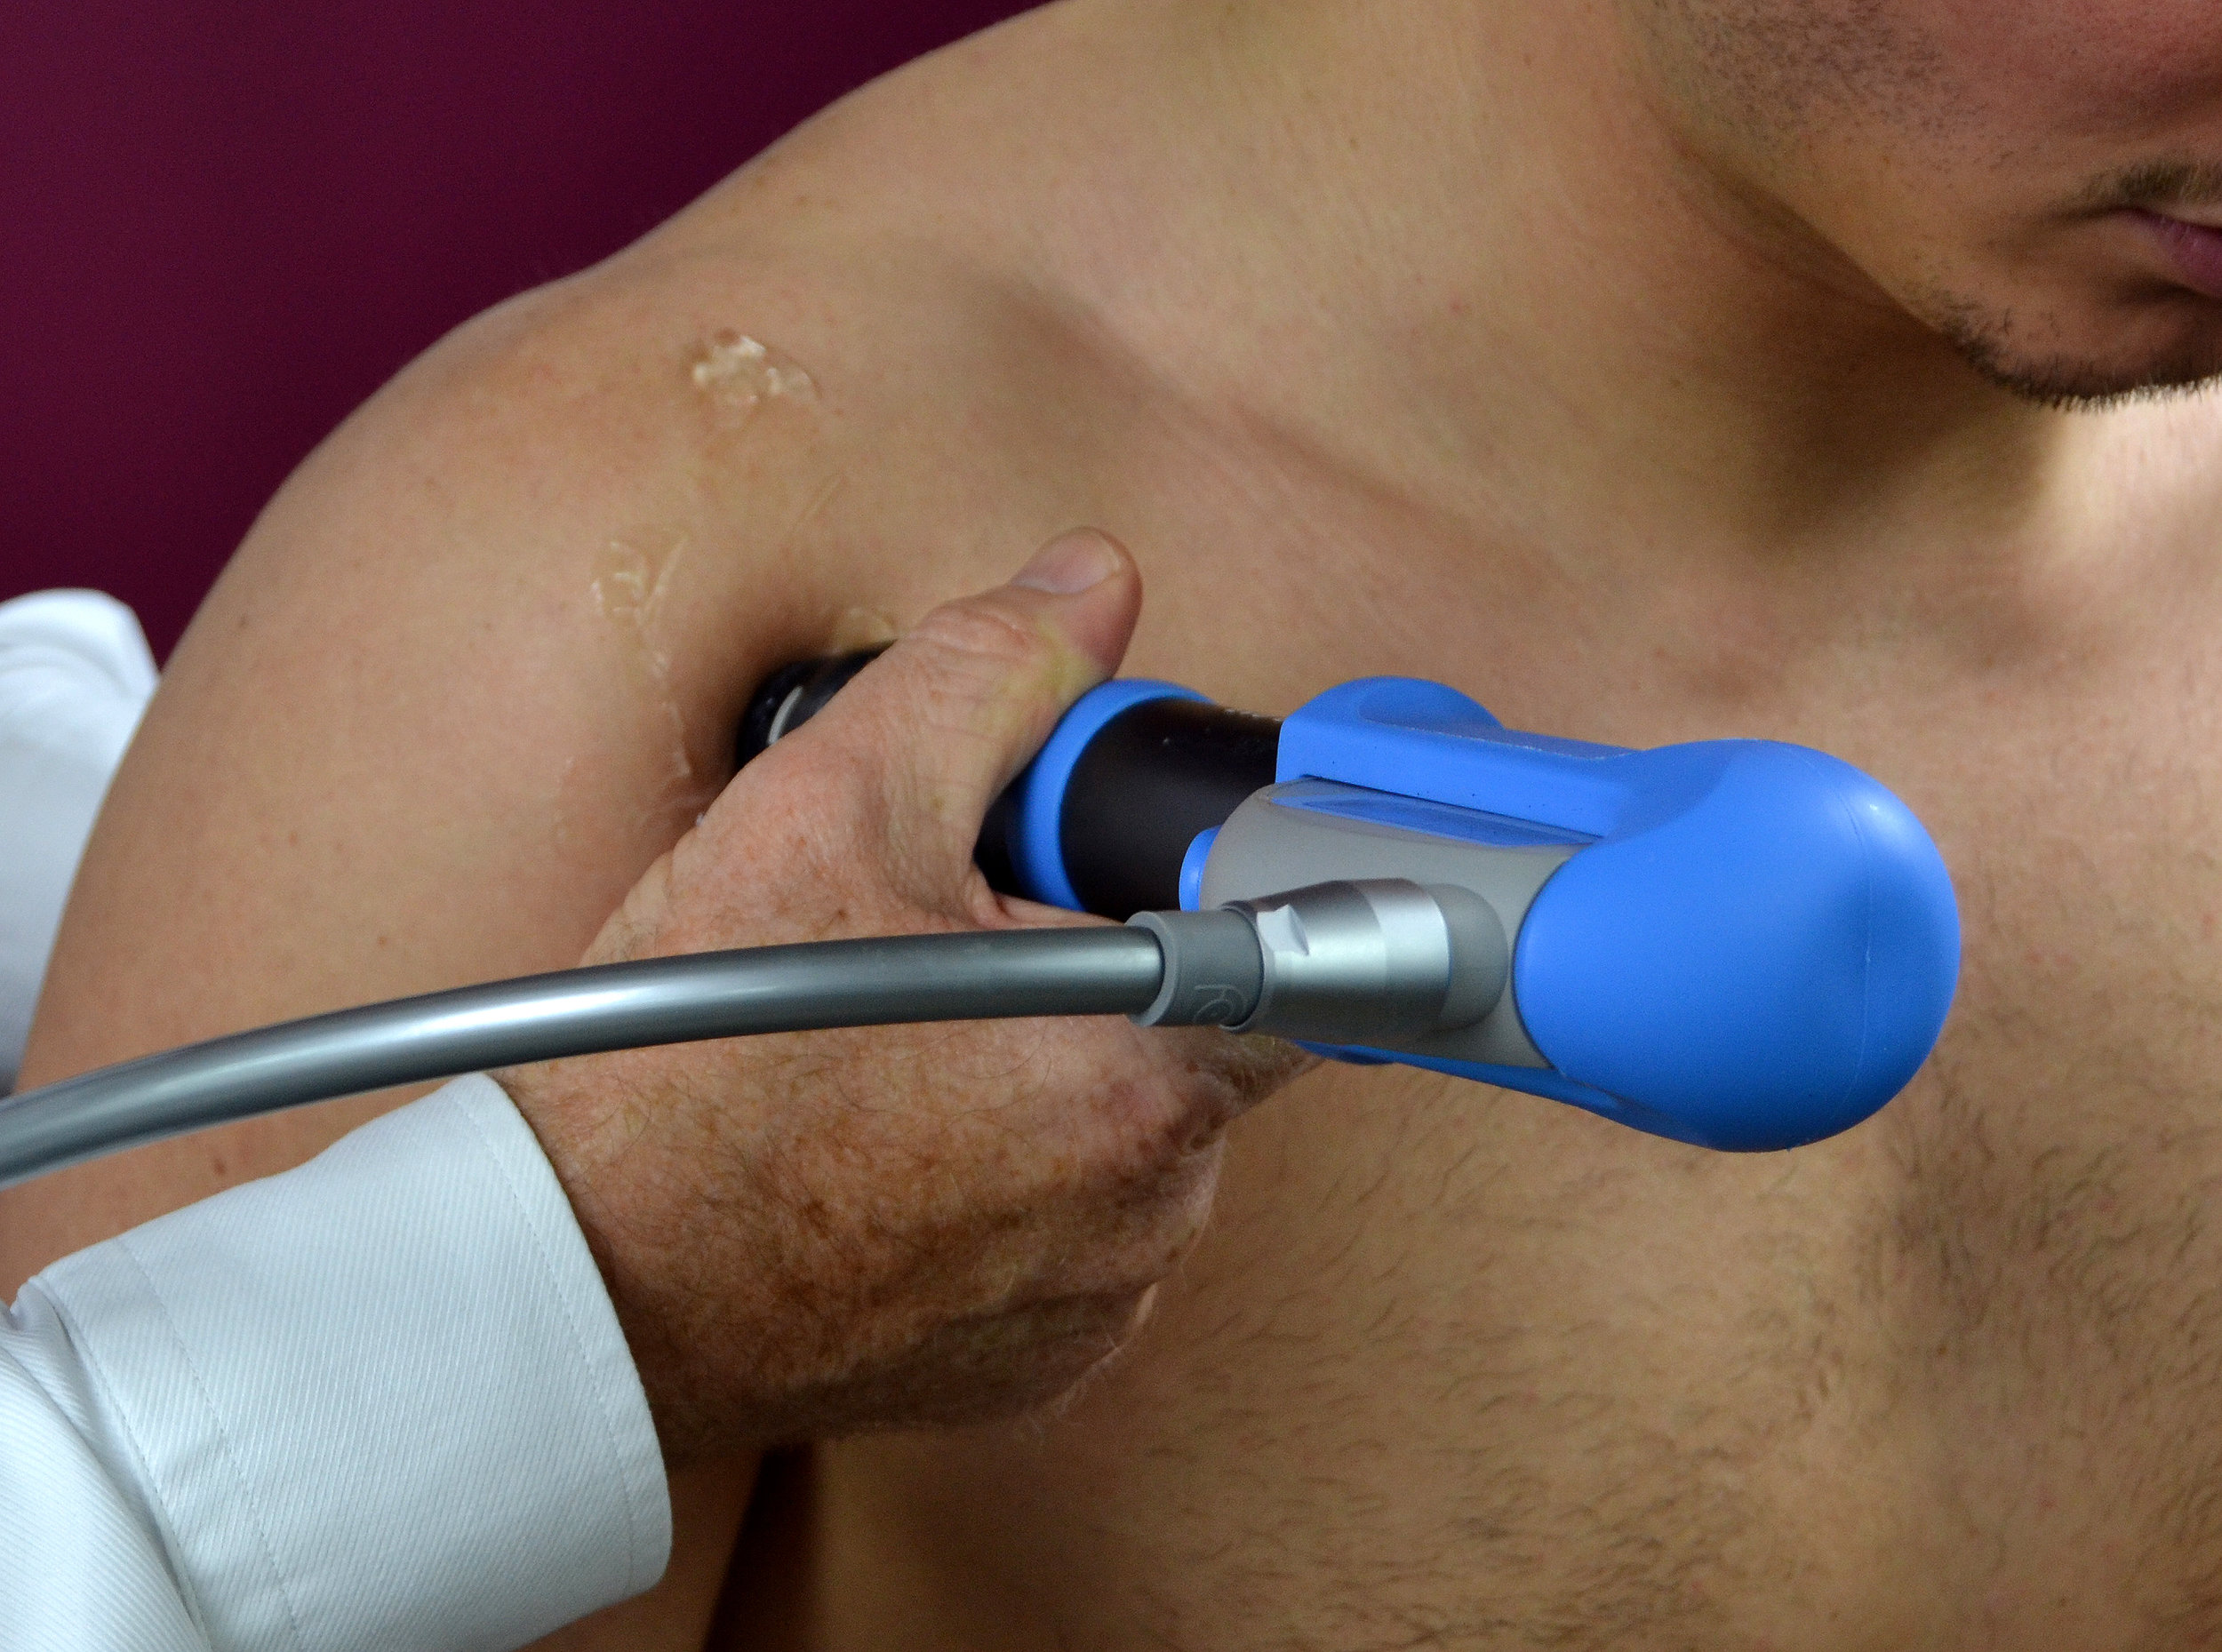 Shoulder Pain — Shockwave Therapy